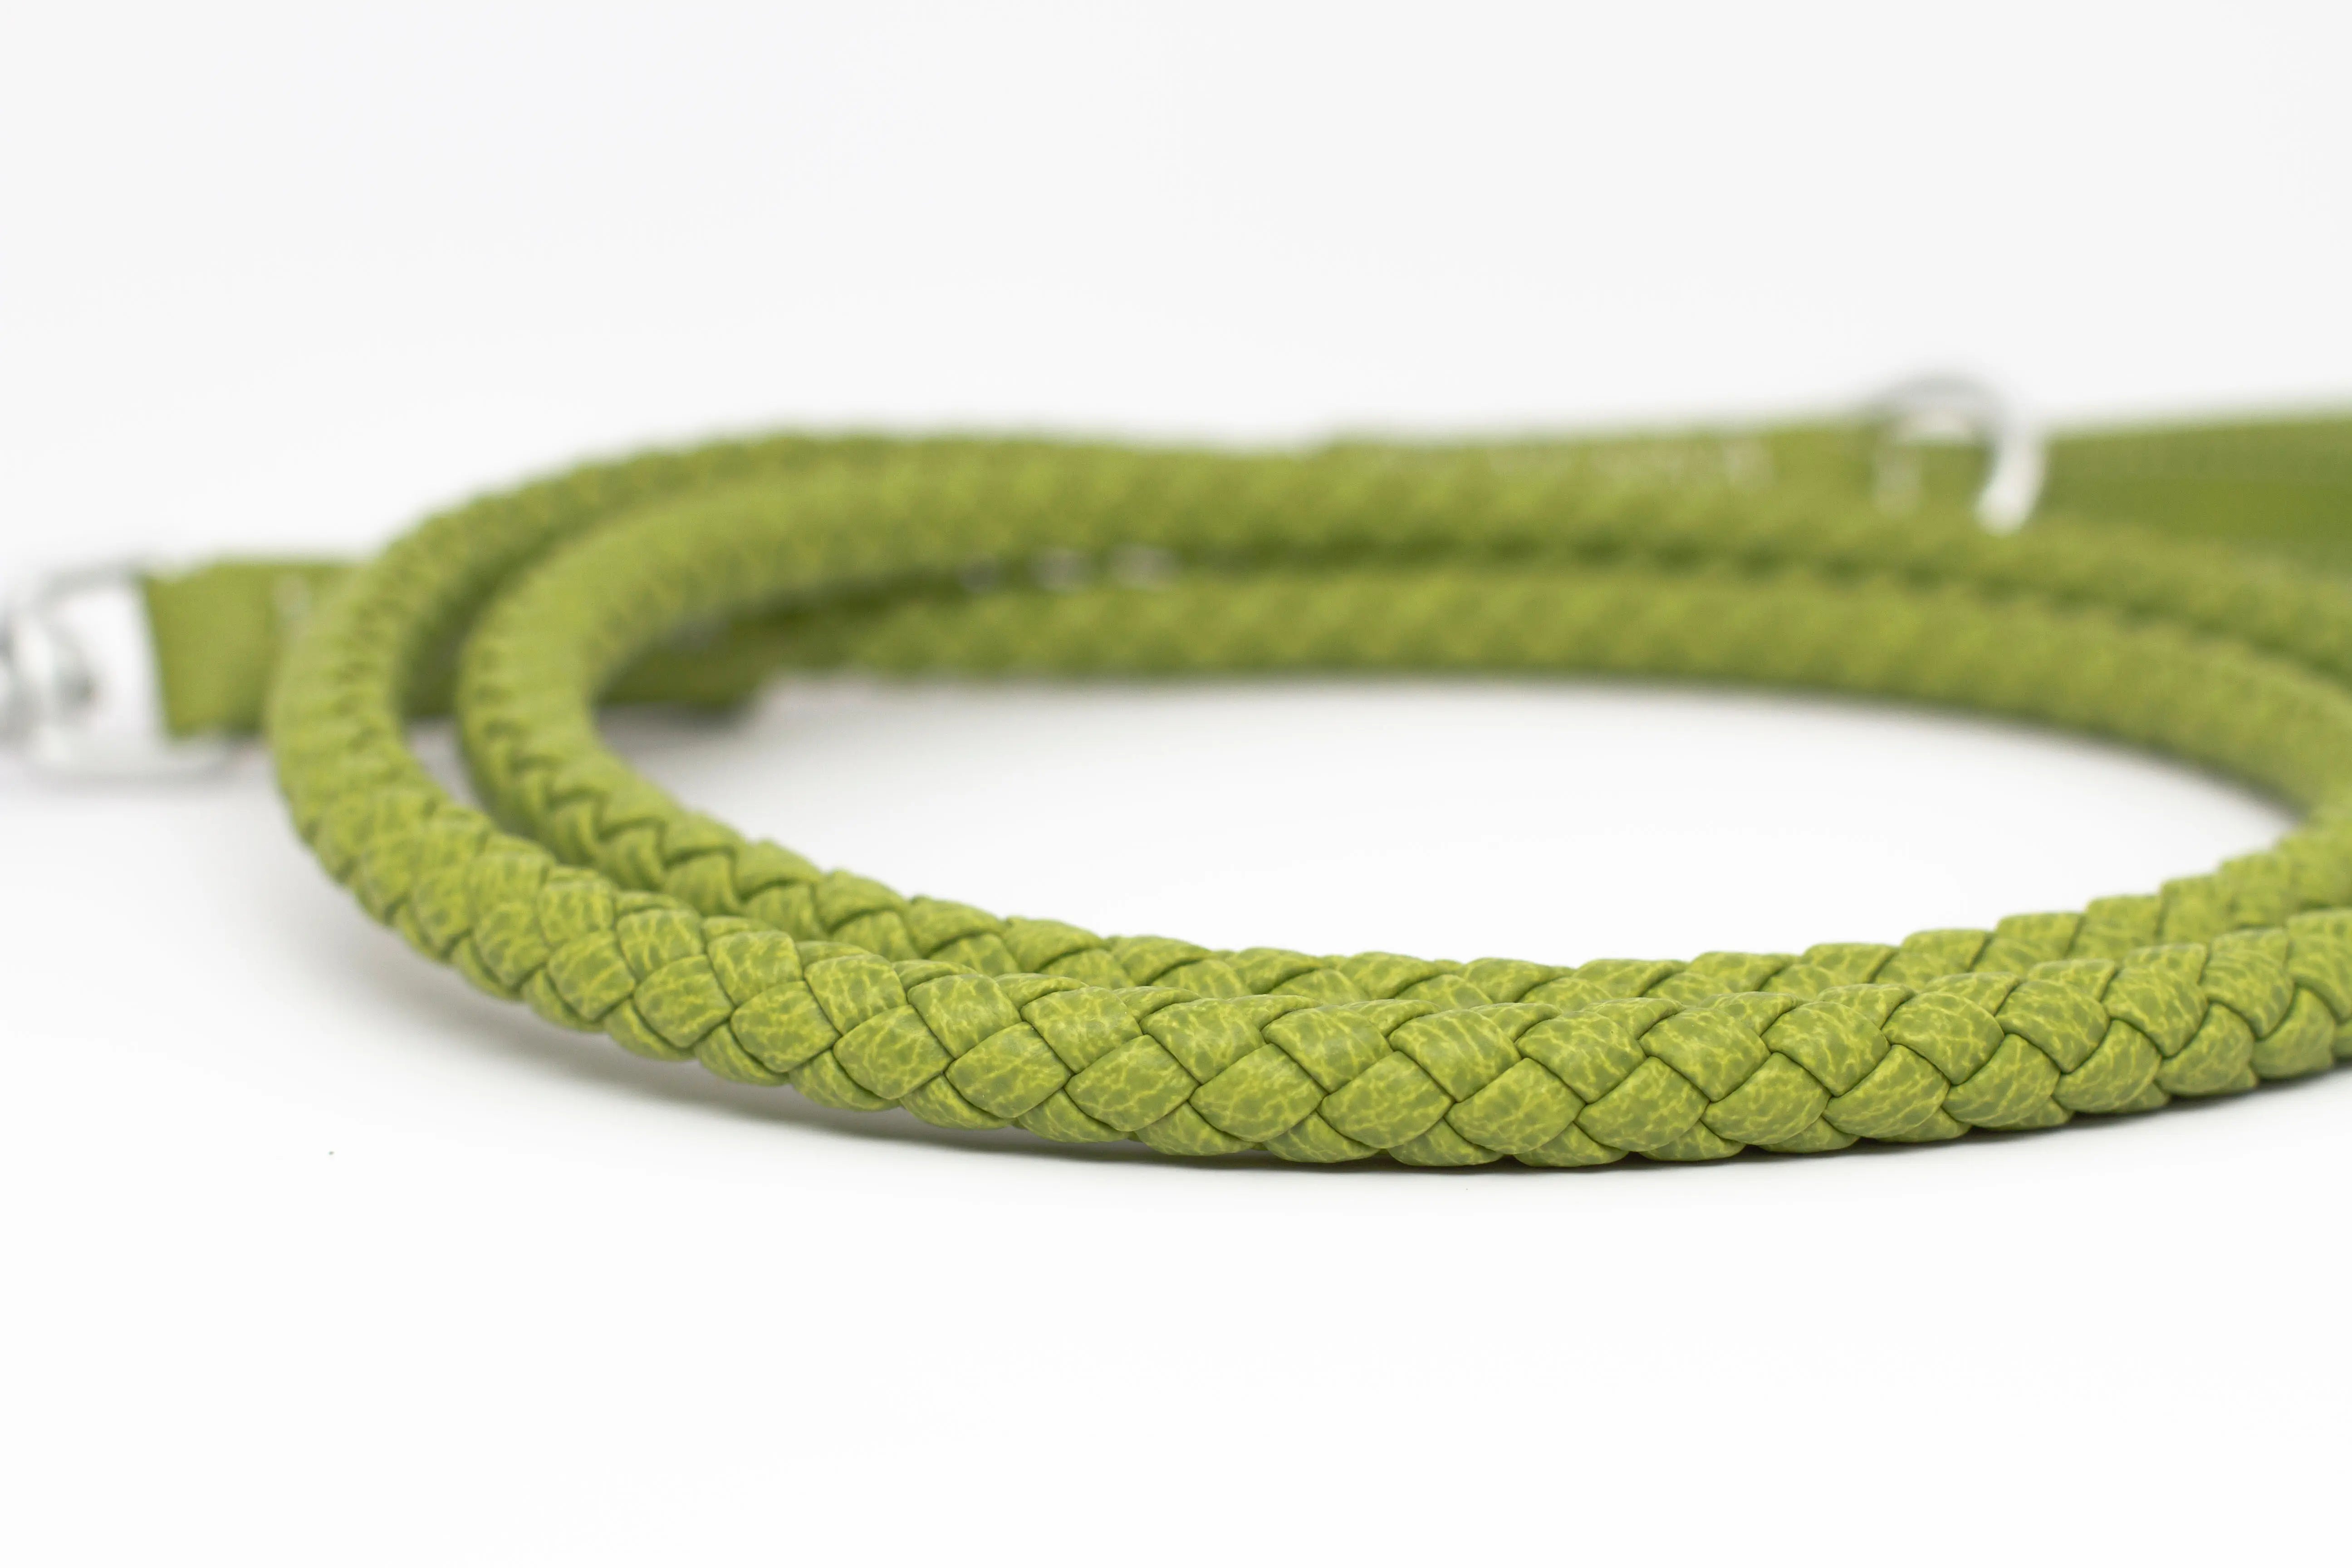 Close up of the braid of waterproof and durable dog leash with marine grade anodized aluminum hardware in the color lime green.